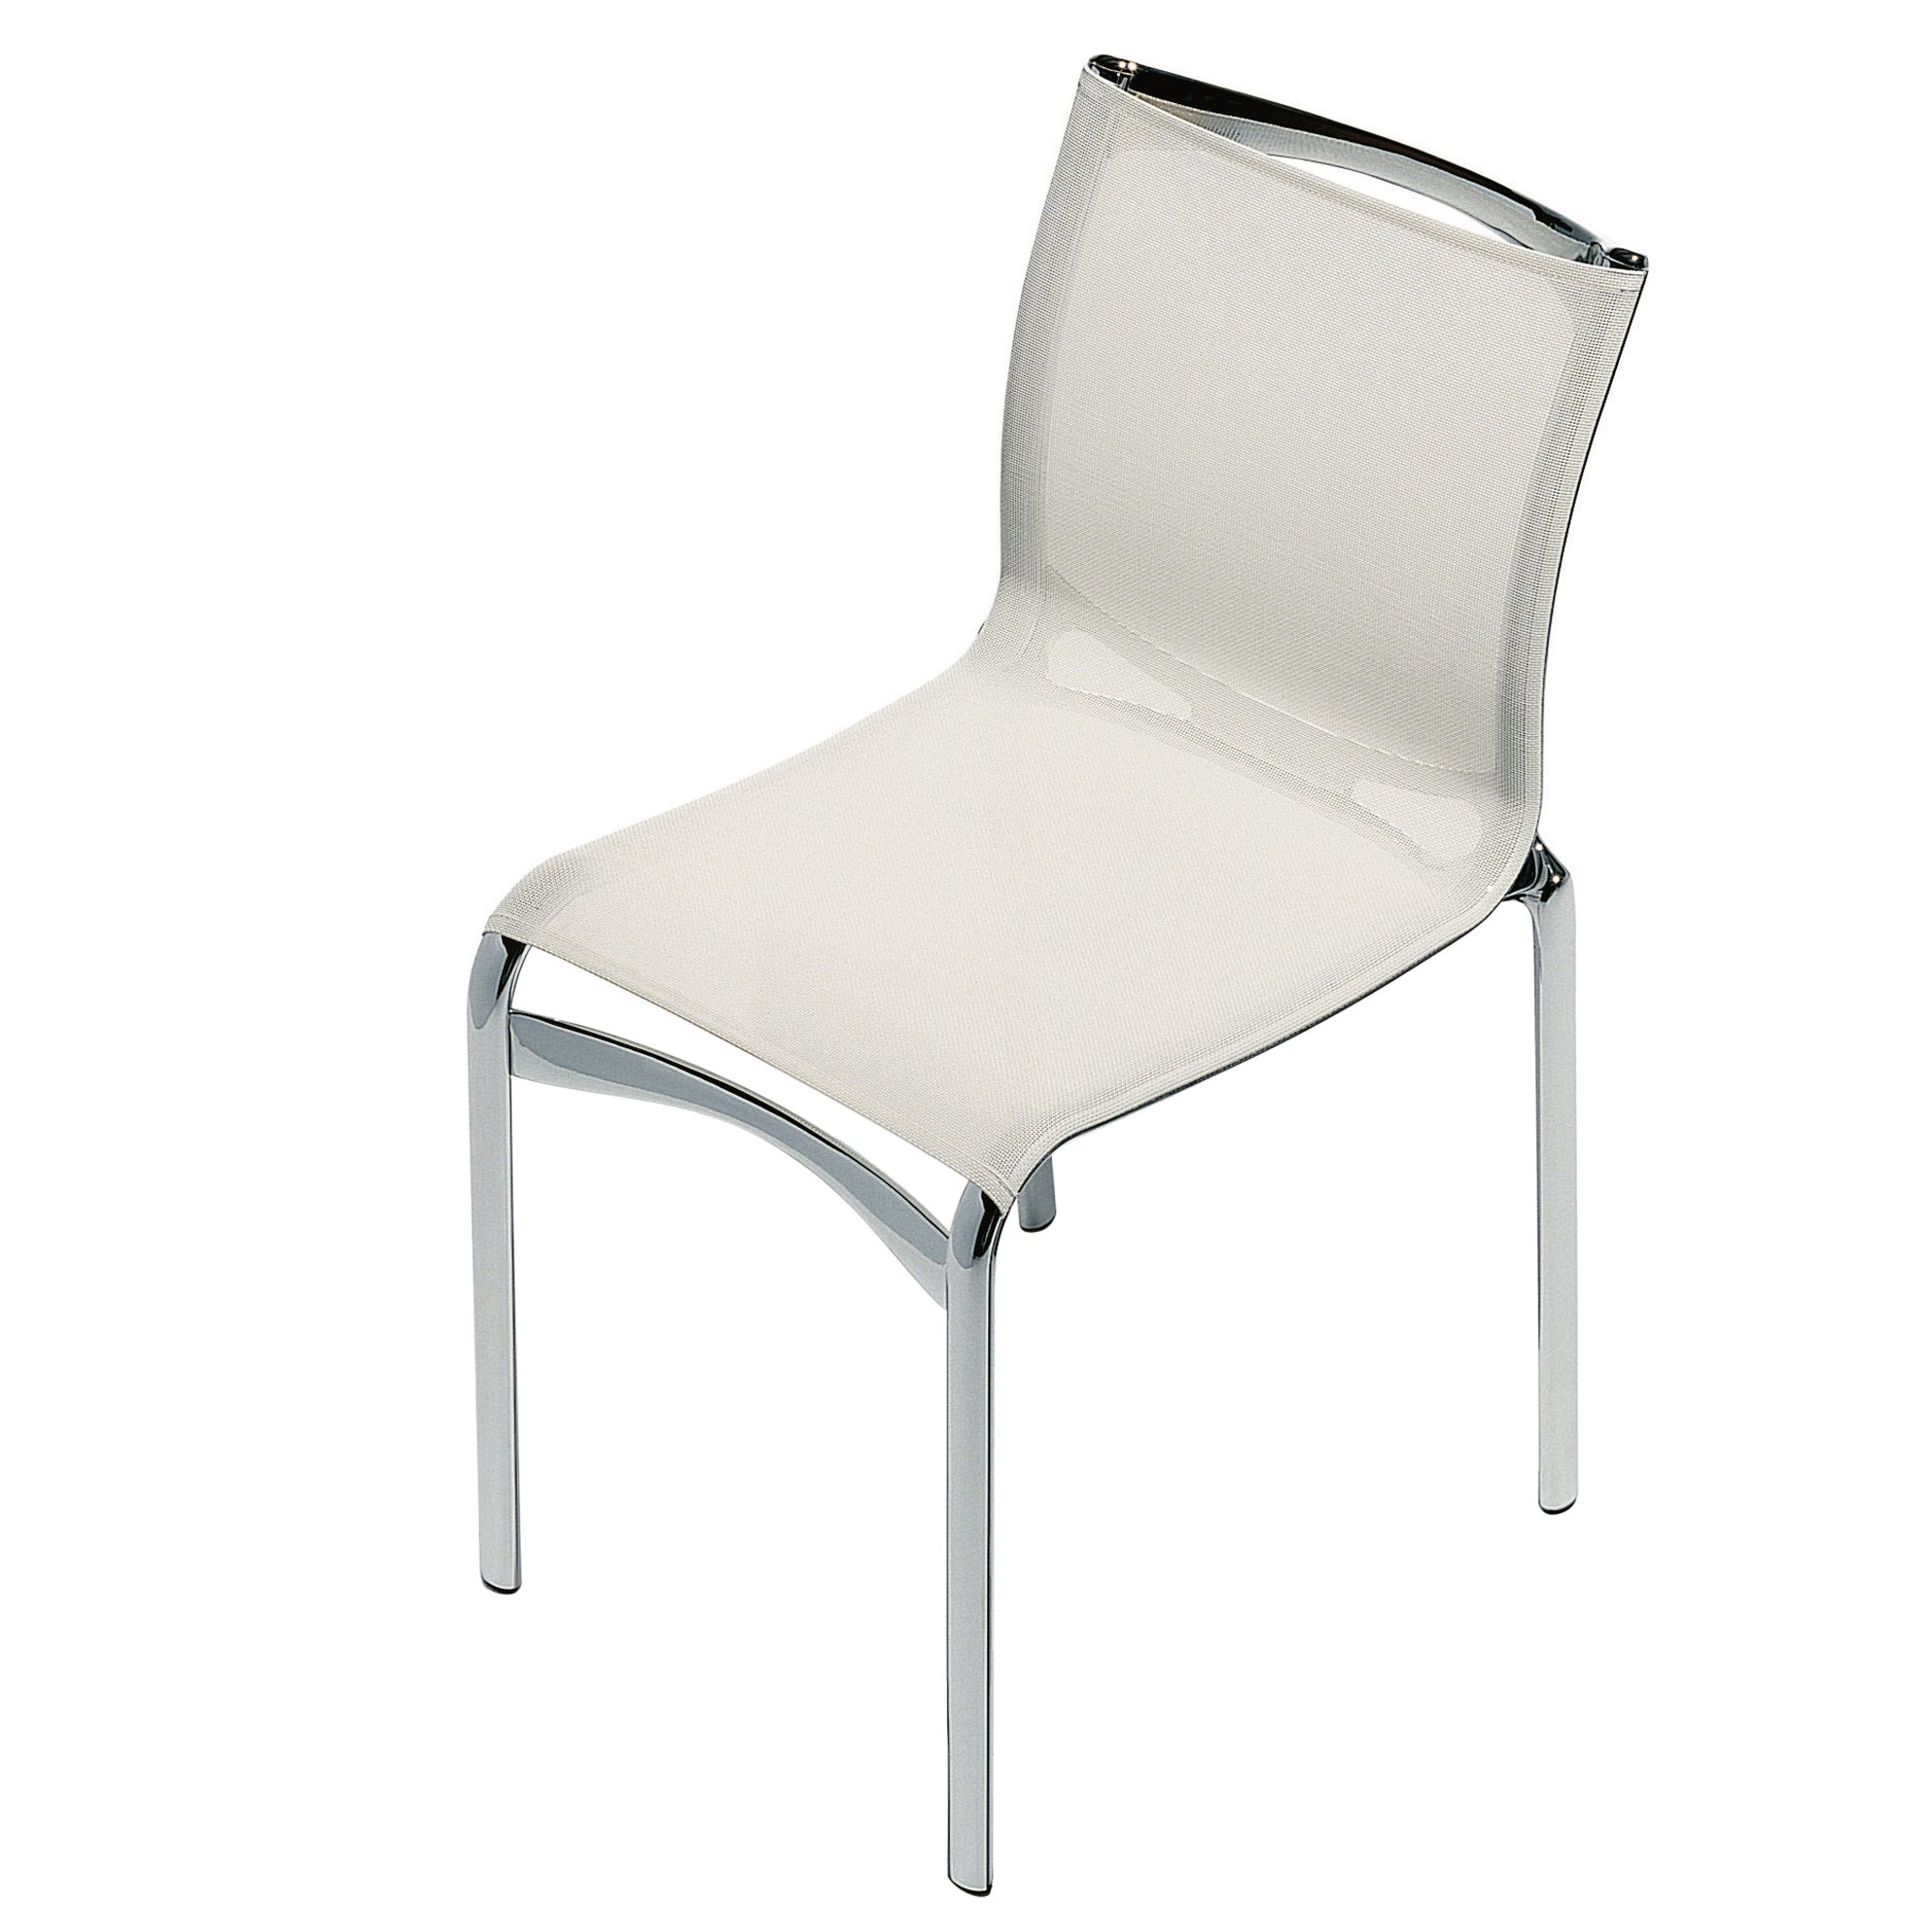 Alias Highframe 40 Chair in White Mesh Seat with Chromed Aluminium Frame For Sale